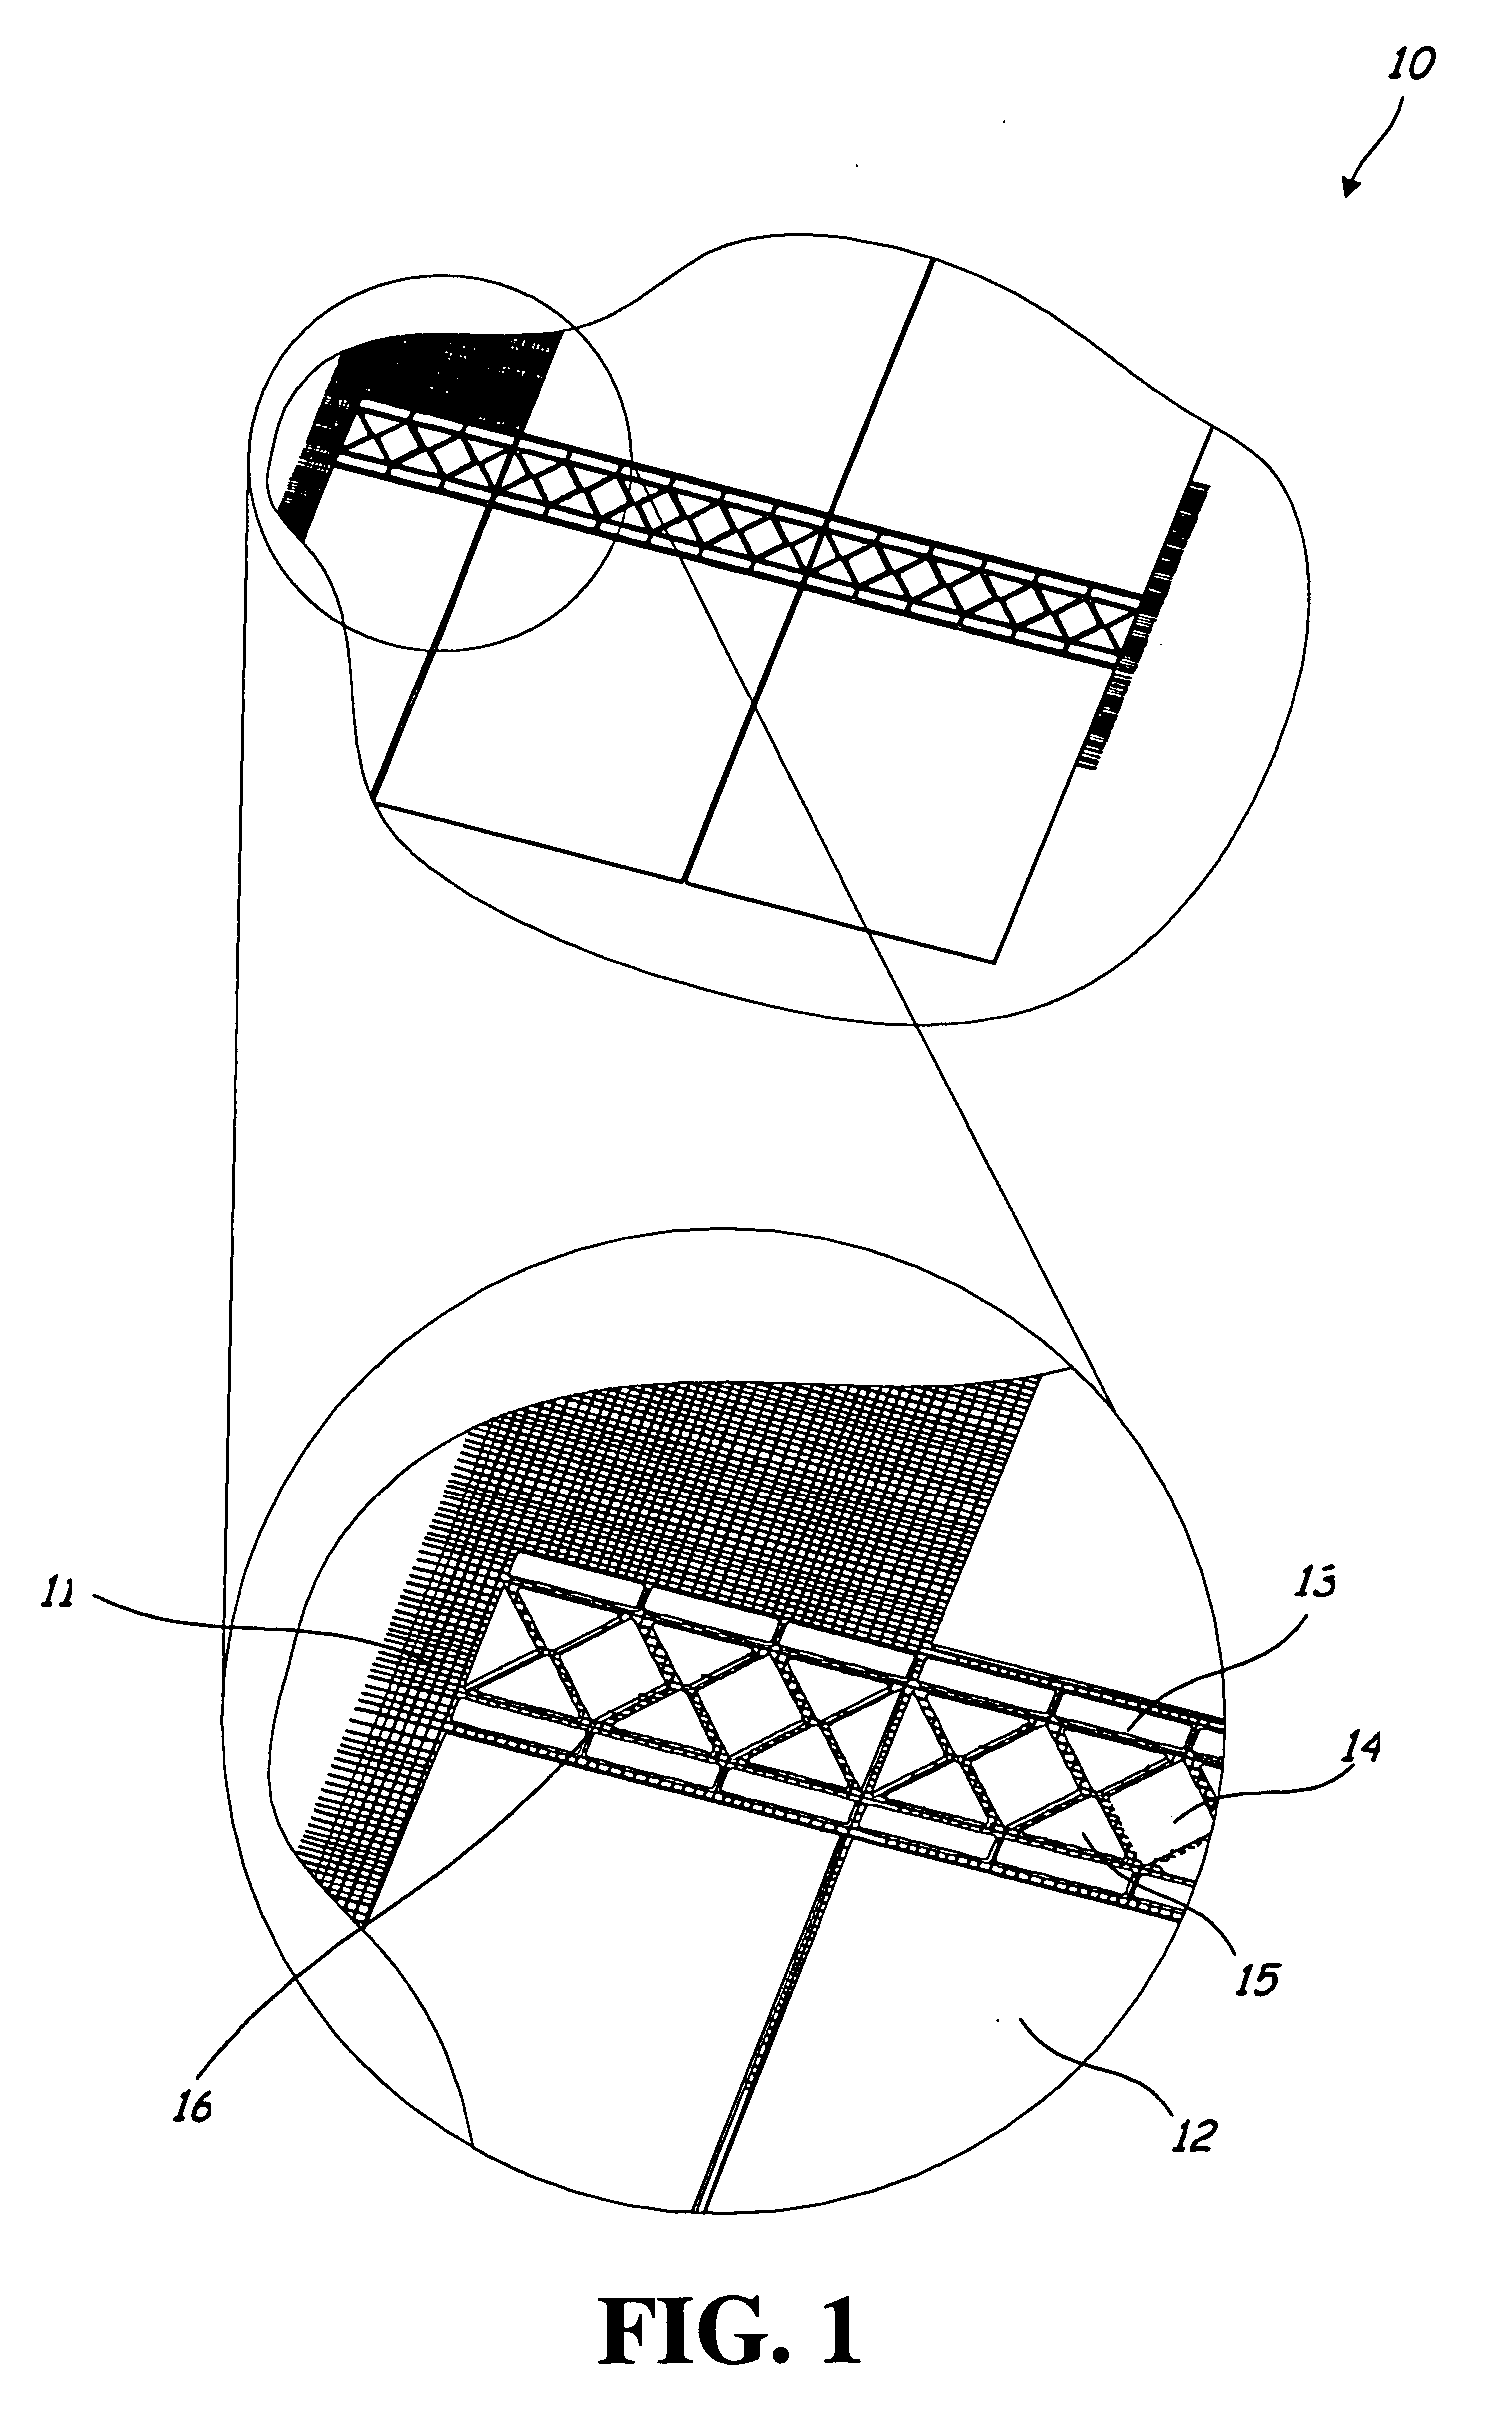 System and method for manufacturing and constructing a mold for use in generating cast polymer products resembling natural stonework